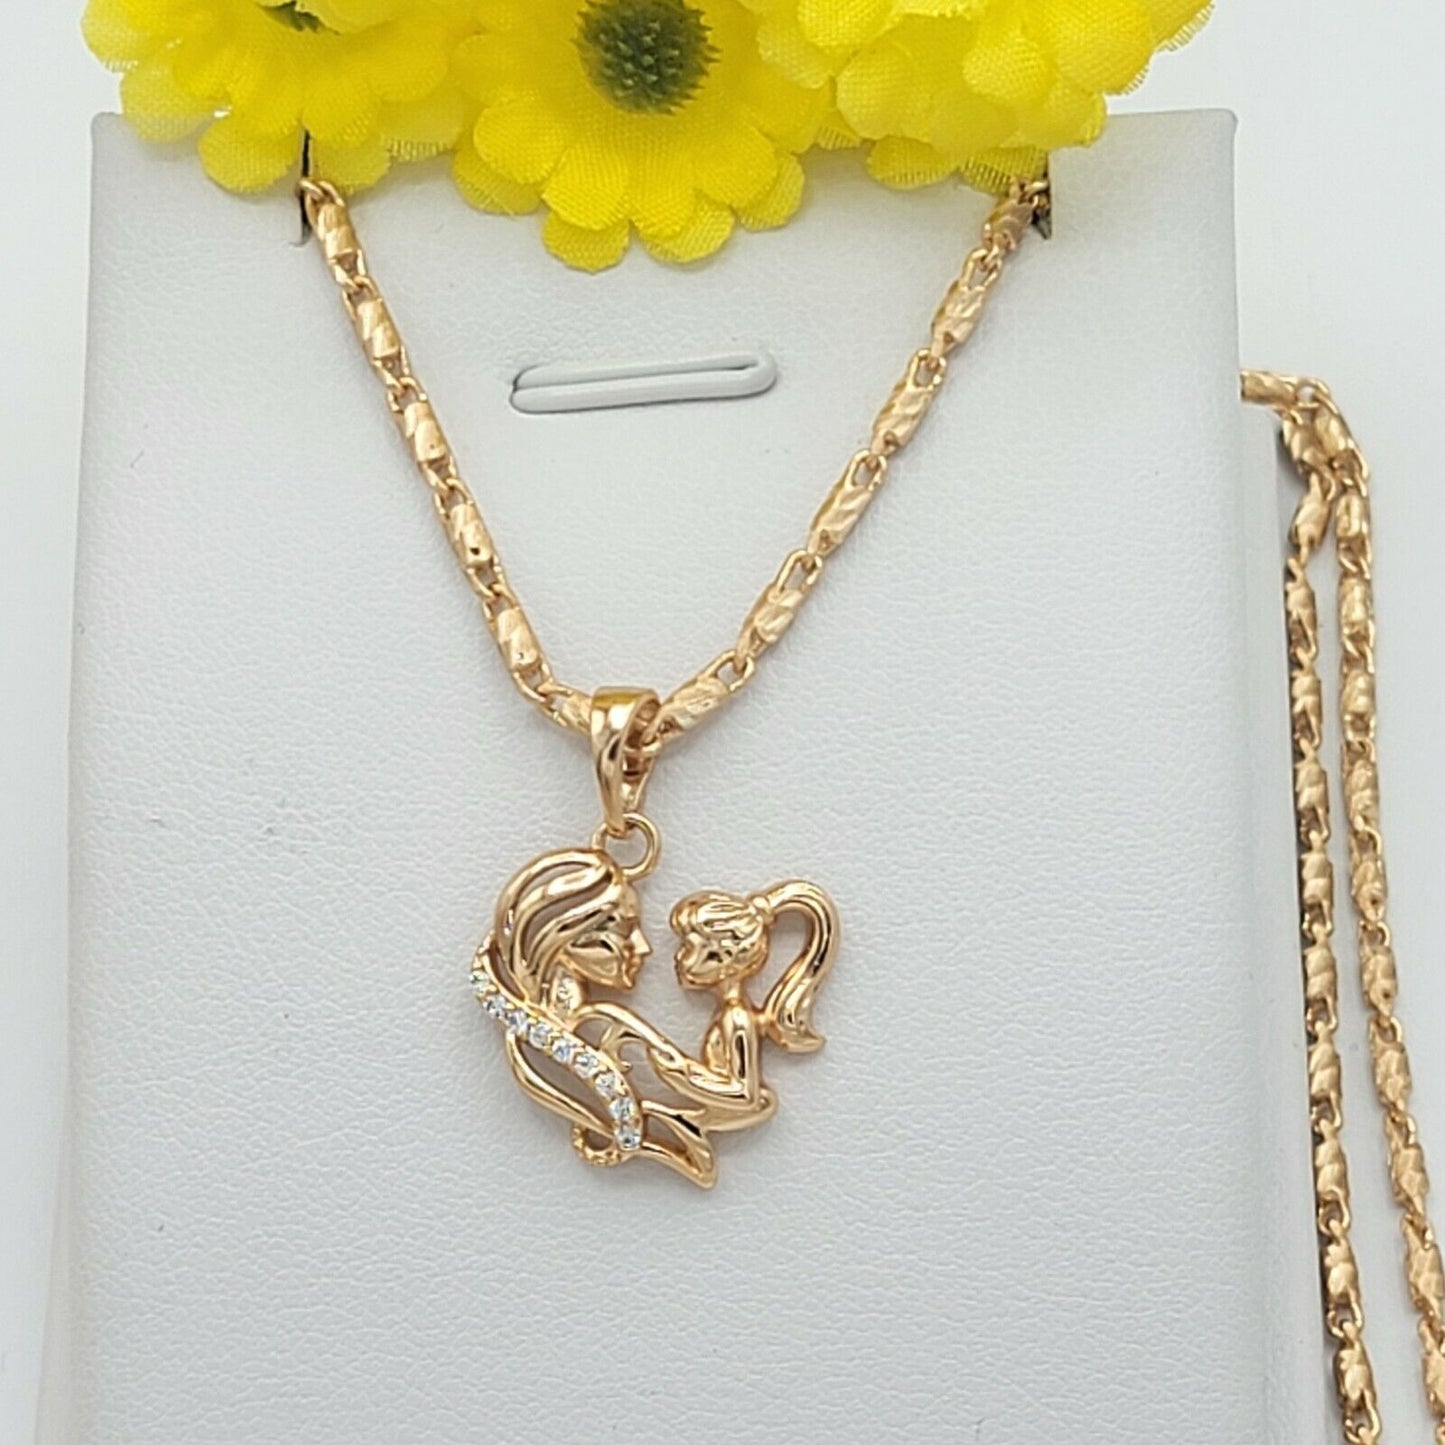 Necklaces - 18K Gold Plated. Mom & Daughter Love Heart Pendant & Chain.